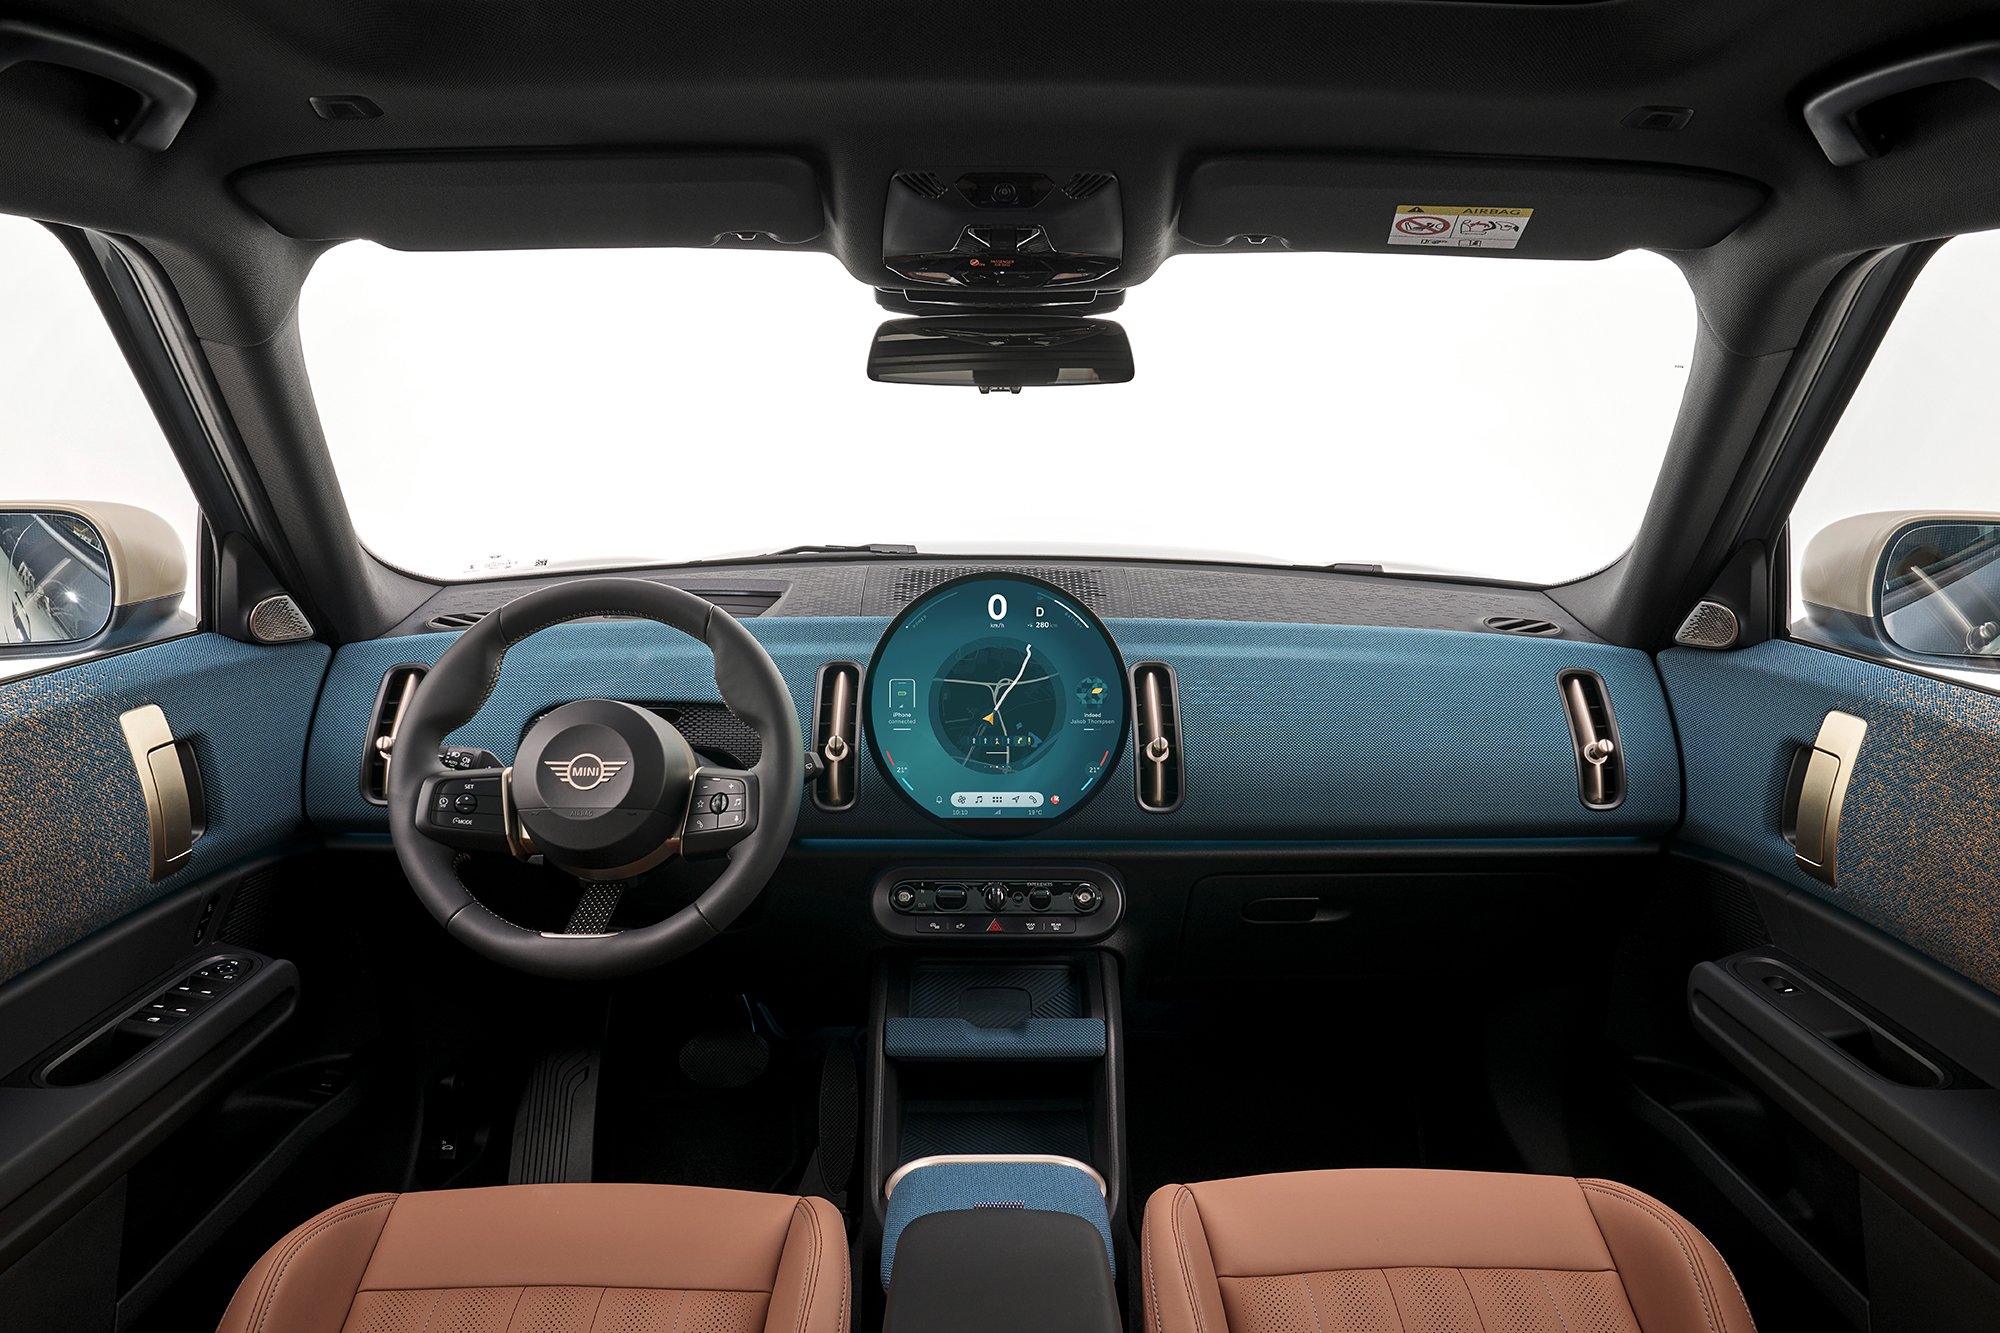 The front and dashboard design of the new all-electric MINI Countryman